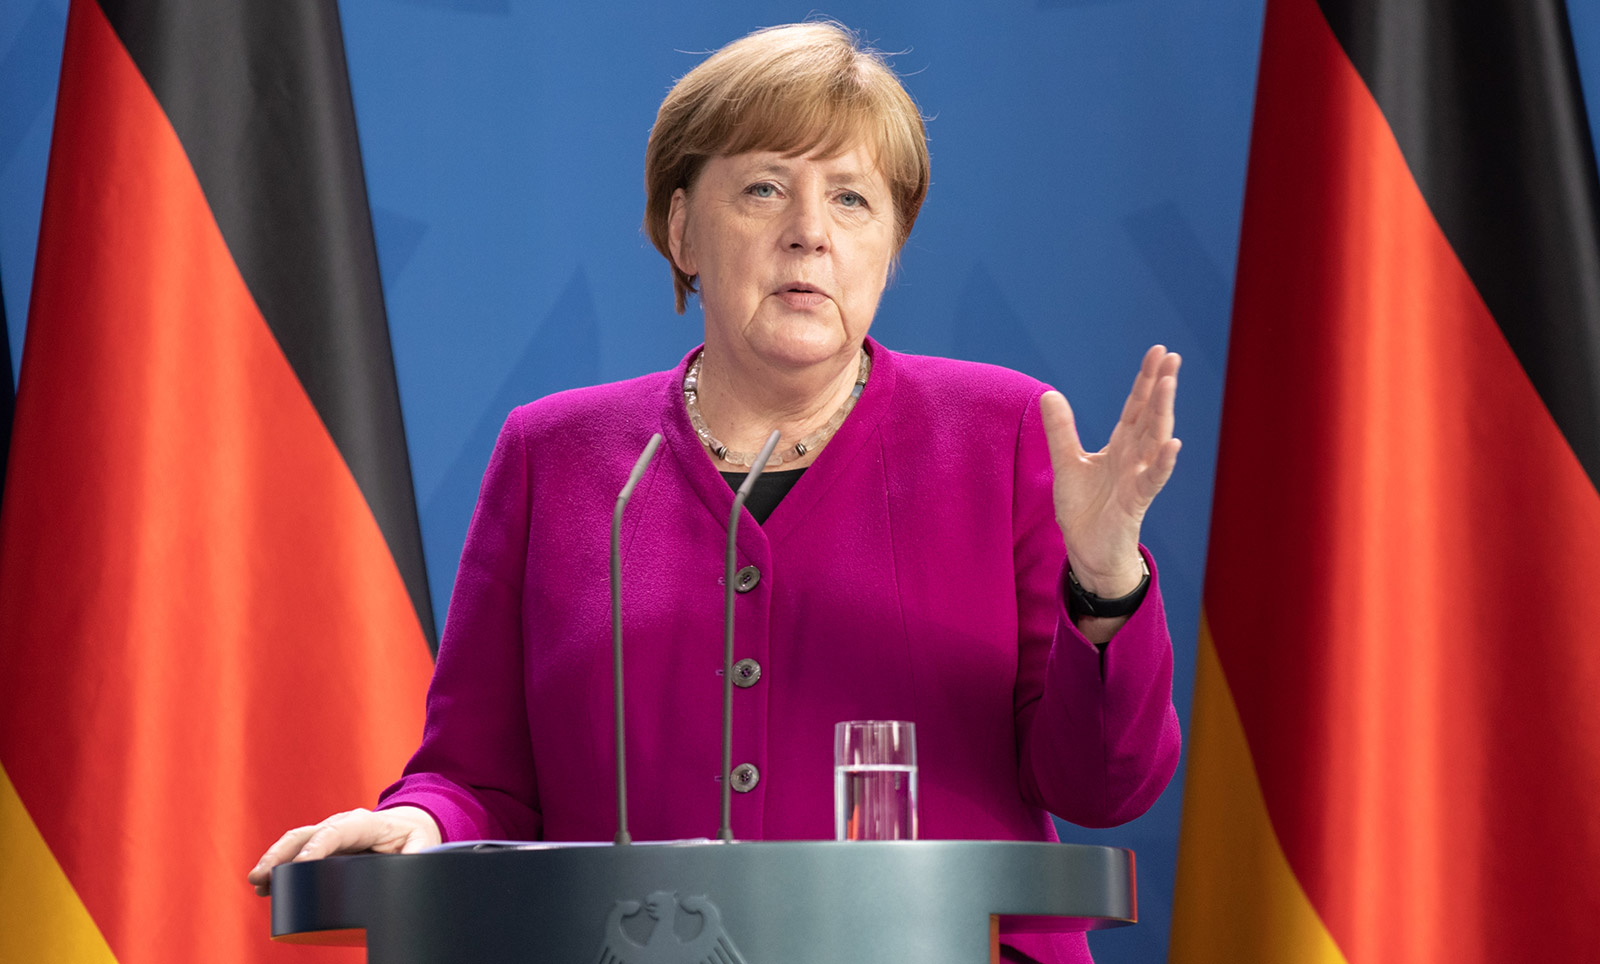 German Chancellor Angela Merkel speaks to the media during a press conference in Berlin on Monday.